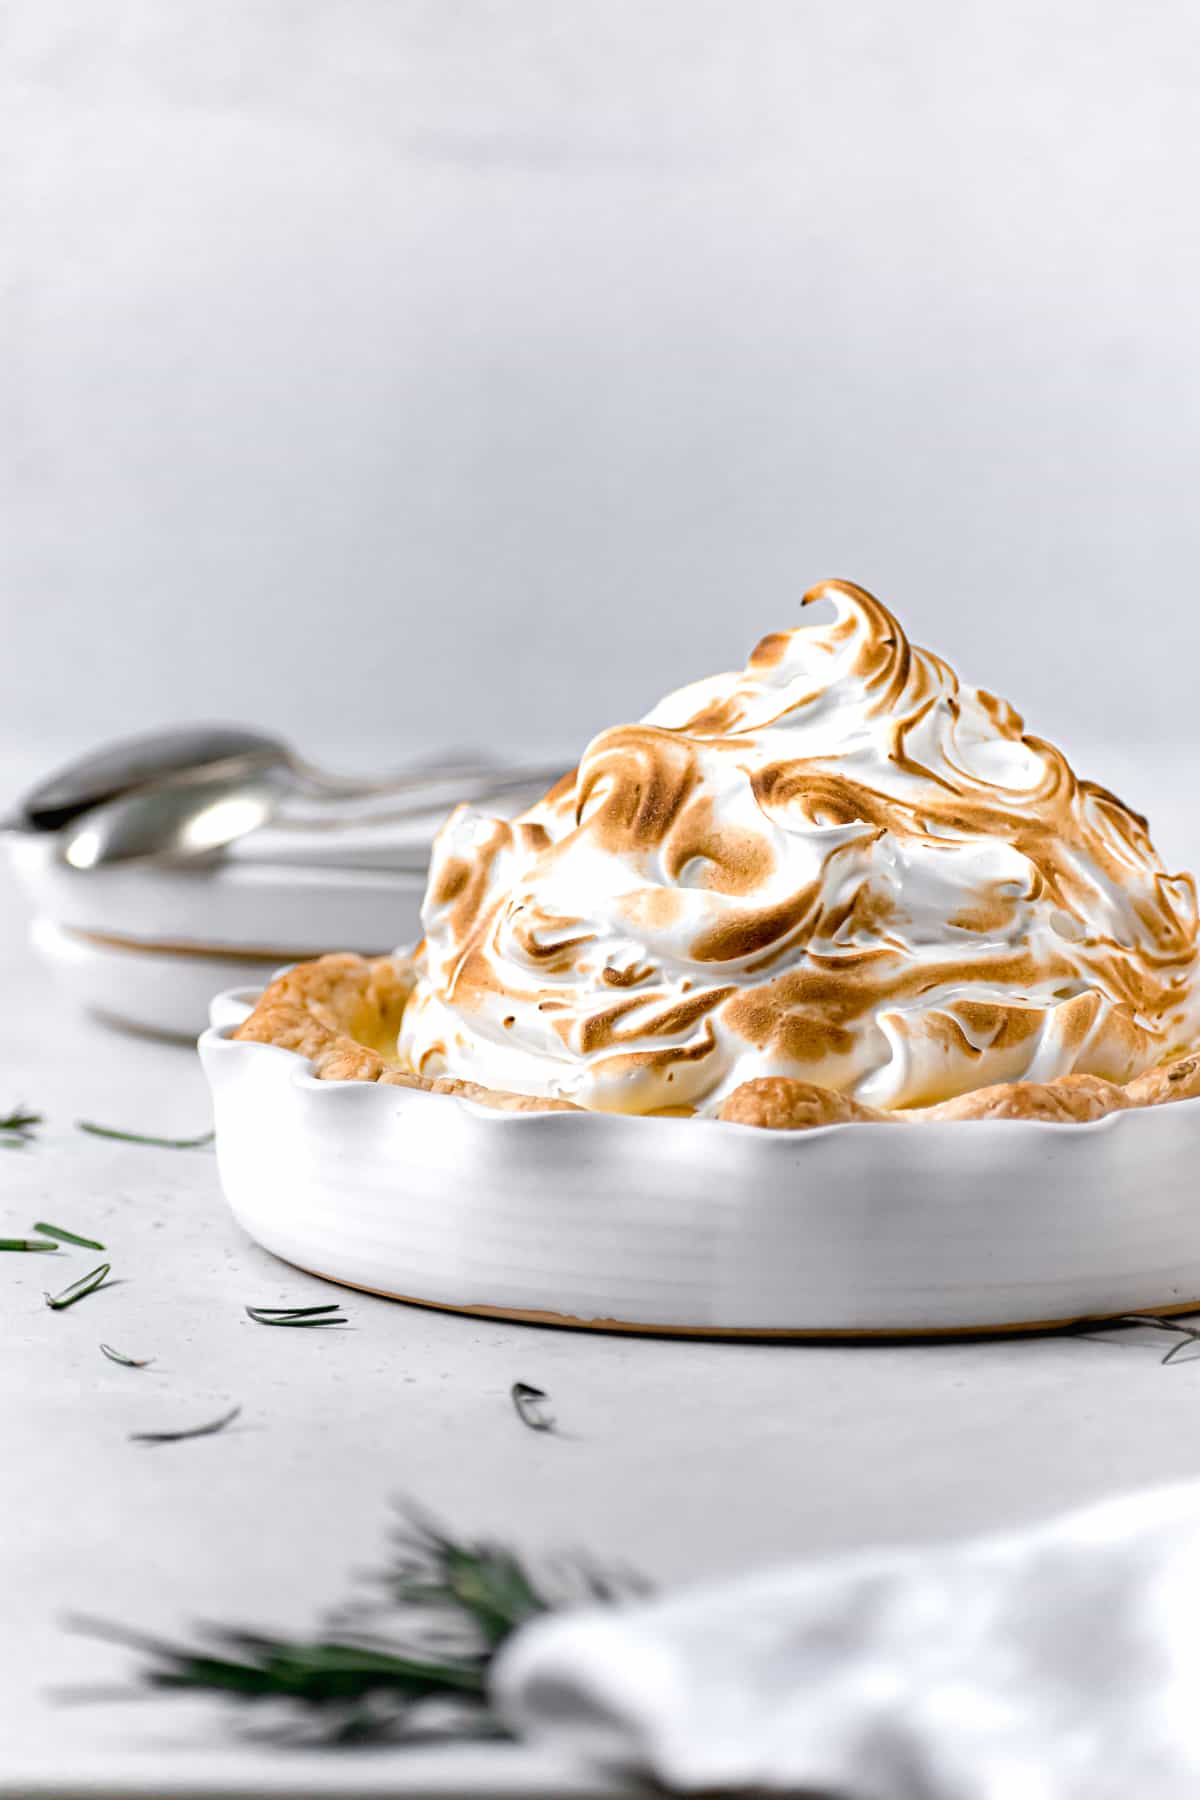 lemon meringue pie in a white dish with toasted meringue on top.